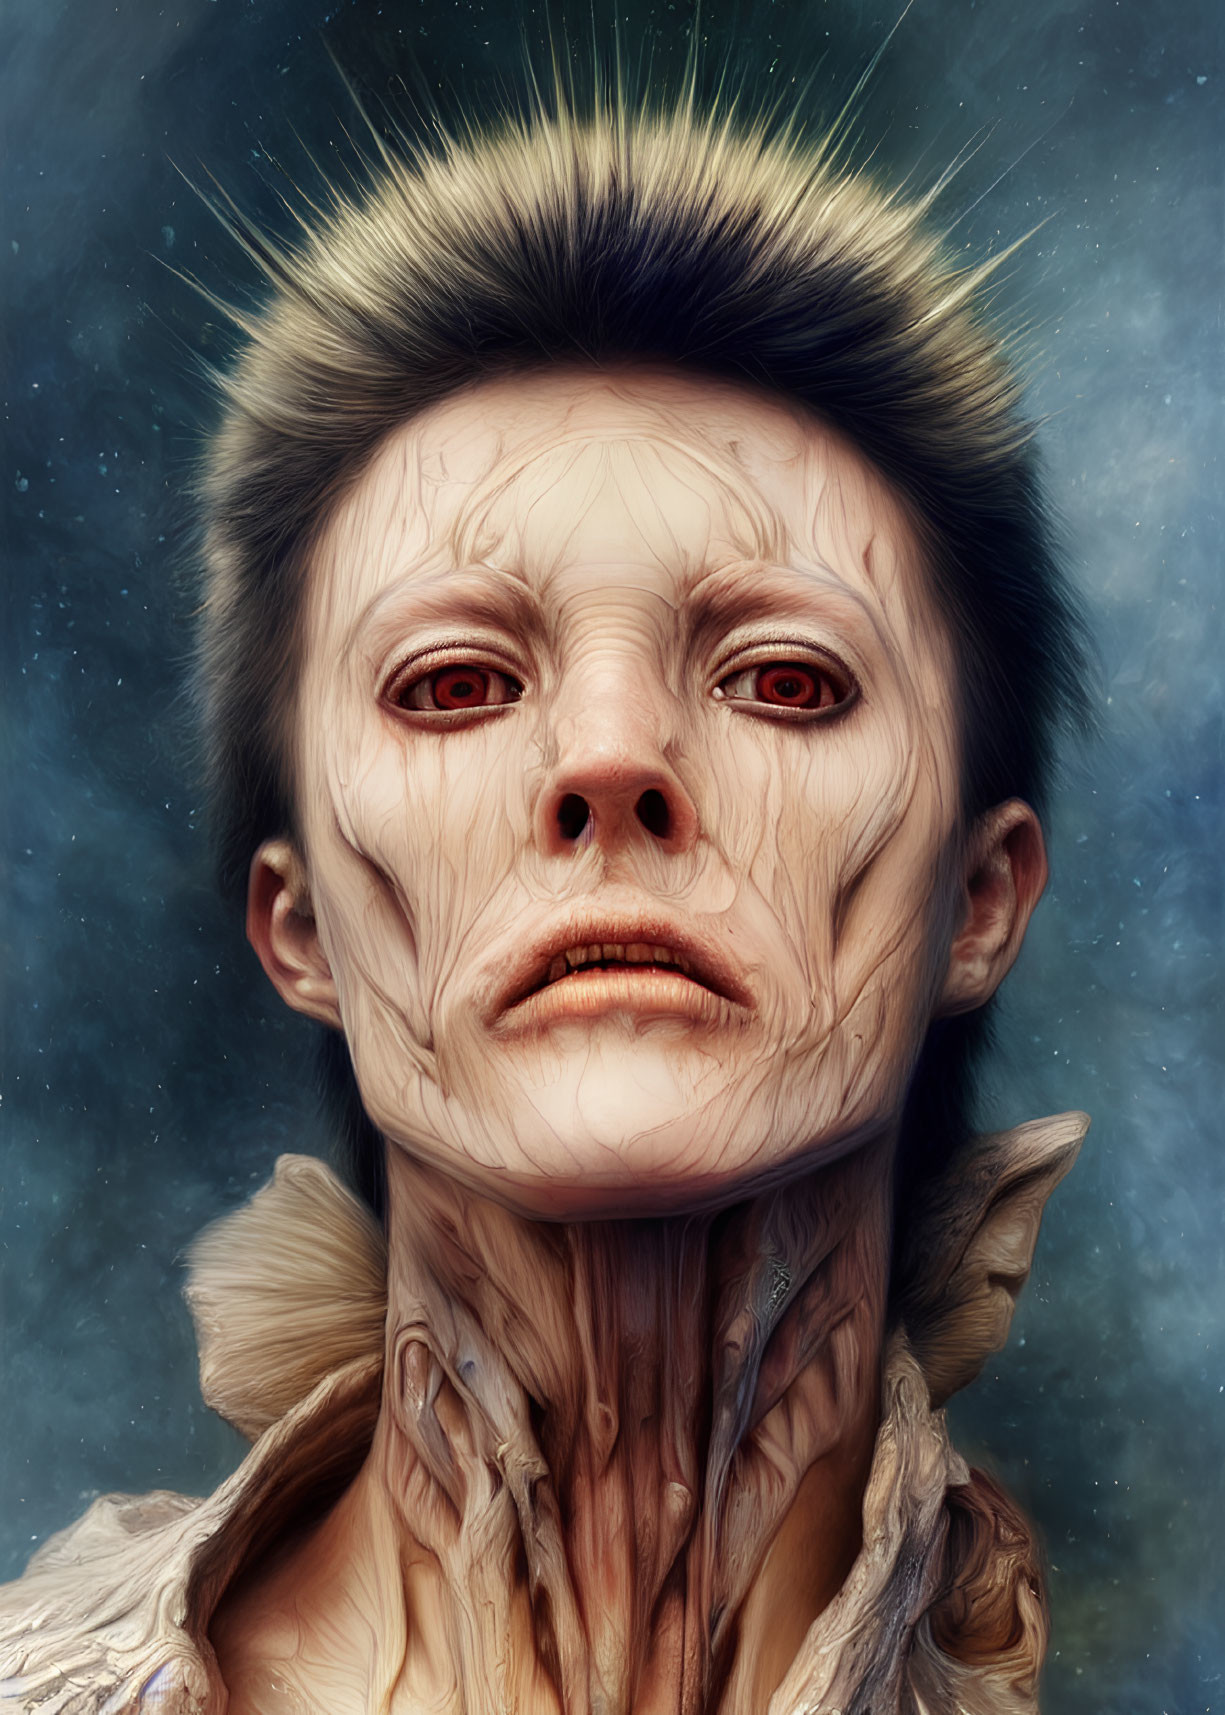 Digital artwork featuring humanoid figure with pale complexion and red eyes against cosmic backdrop